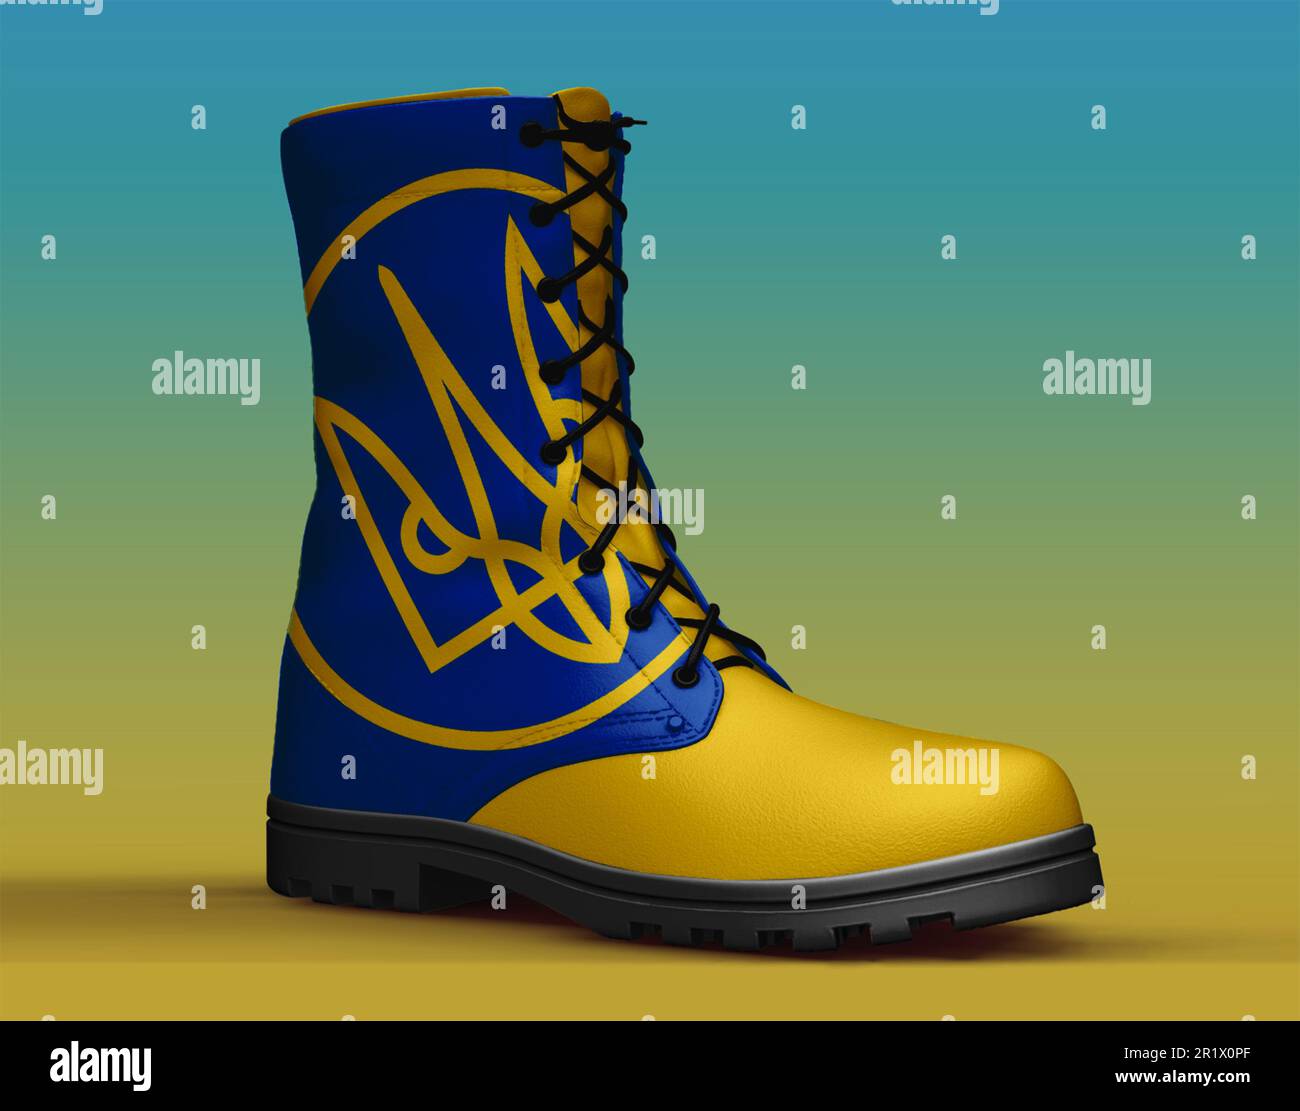 Heroic concept of boot mockup with Ukraine flag for spirit freedom. Stock Photo